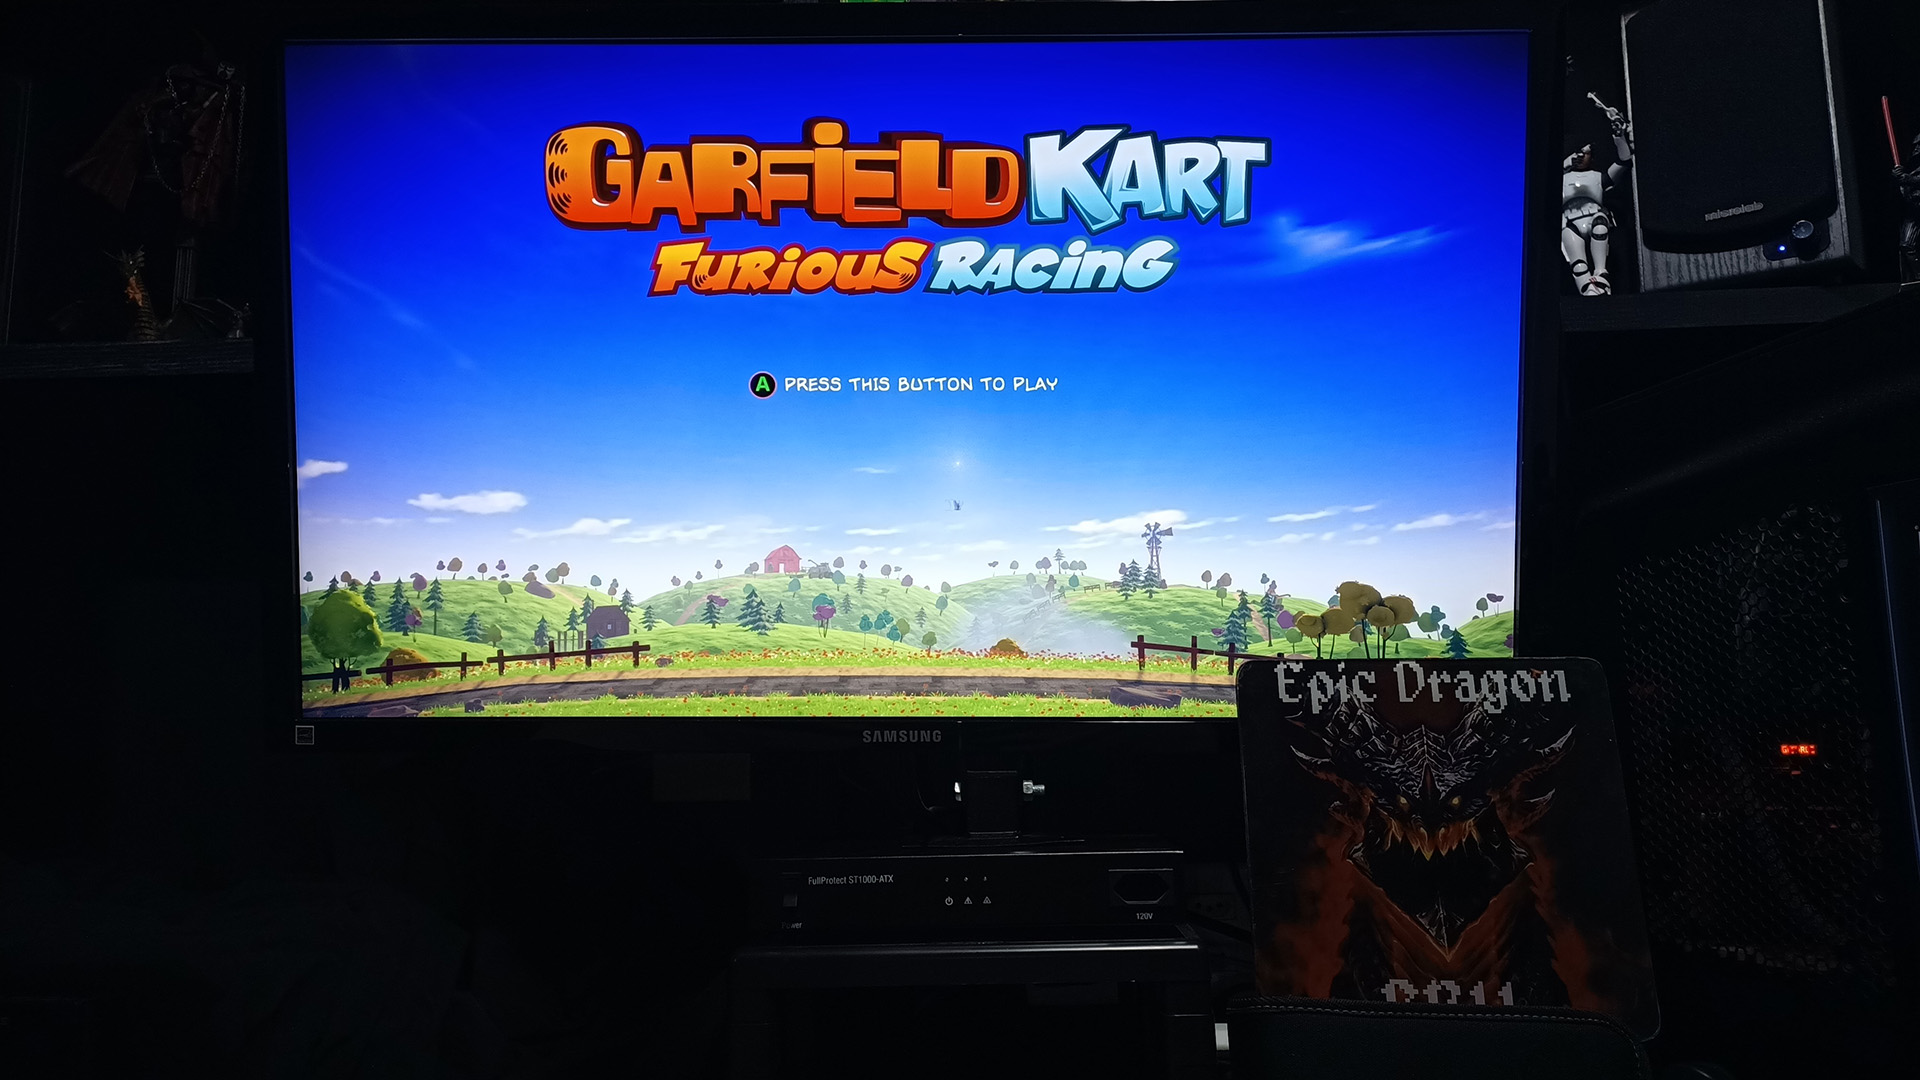 Garfield Kart Furious Racing: City Slicker [Time Trial: Lap Time] time of 0:00:40.268